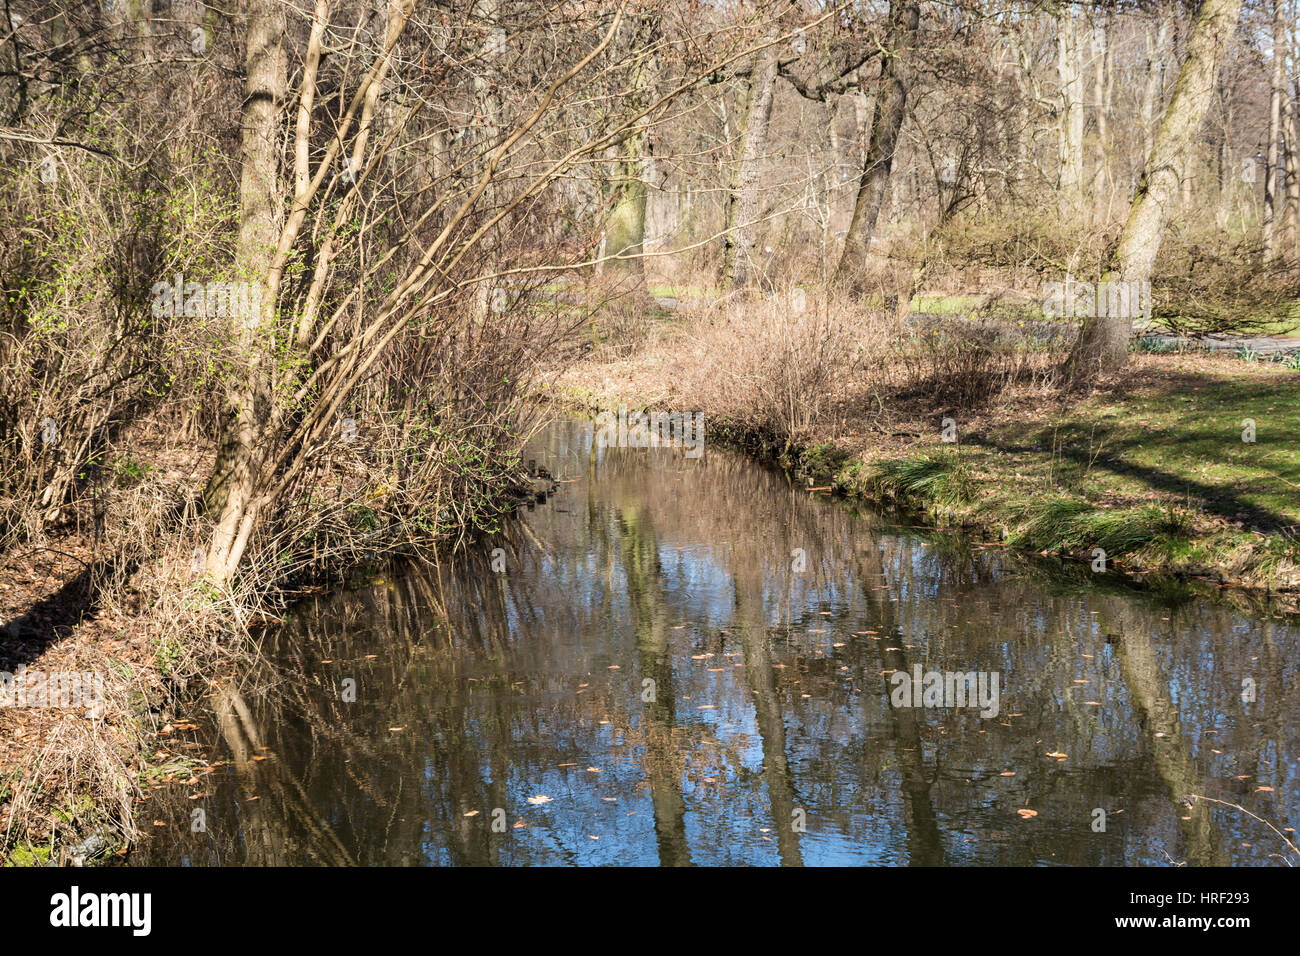 Lake and trees in the Tiergarten park, Berlin, Germany Stock Photo